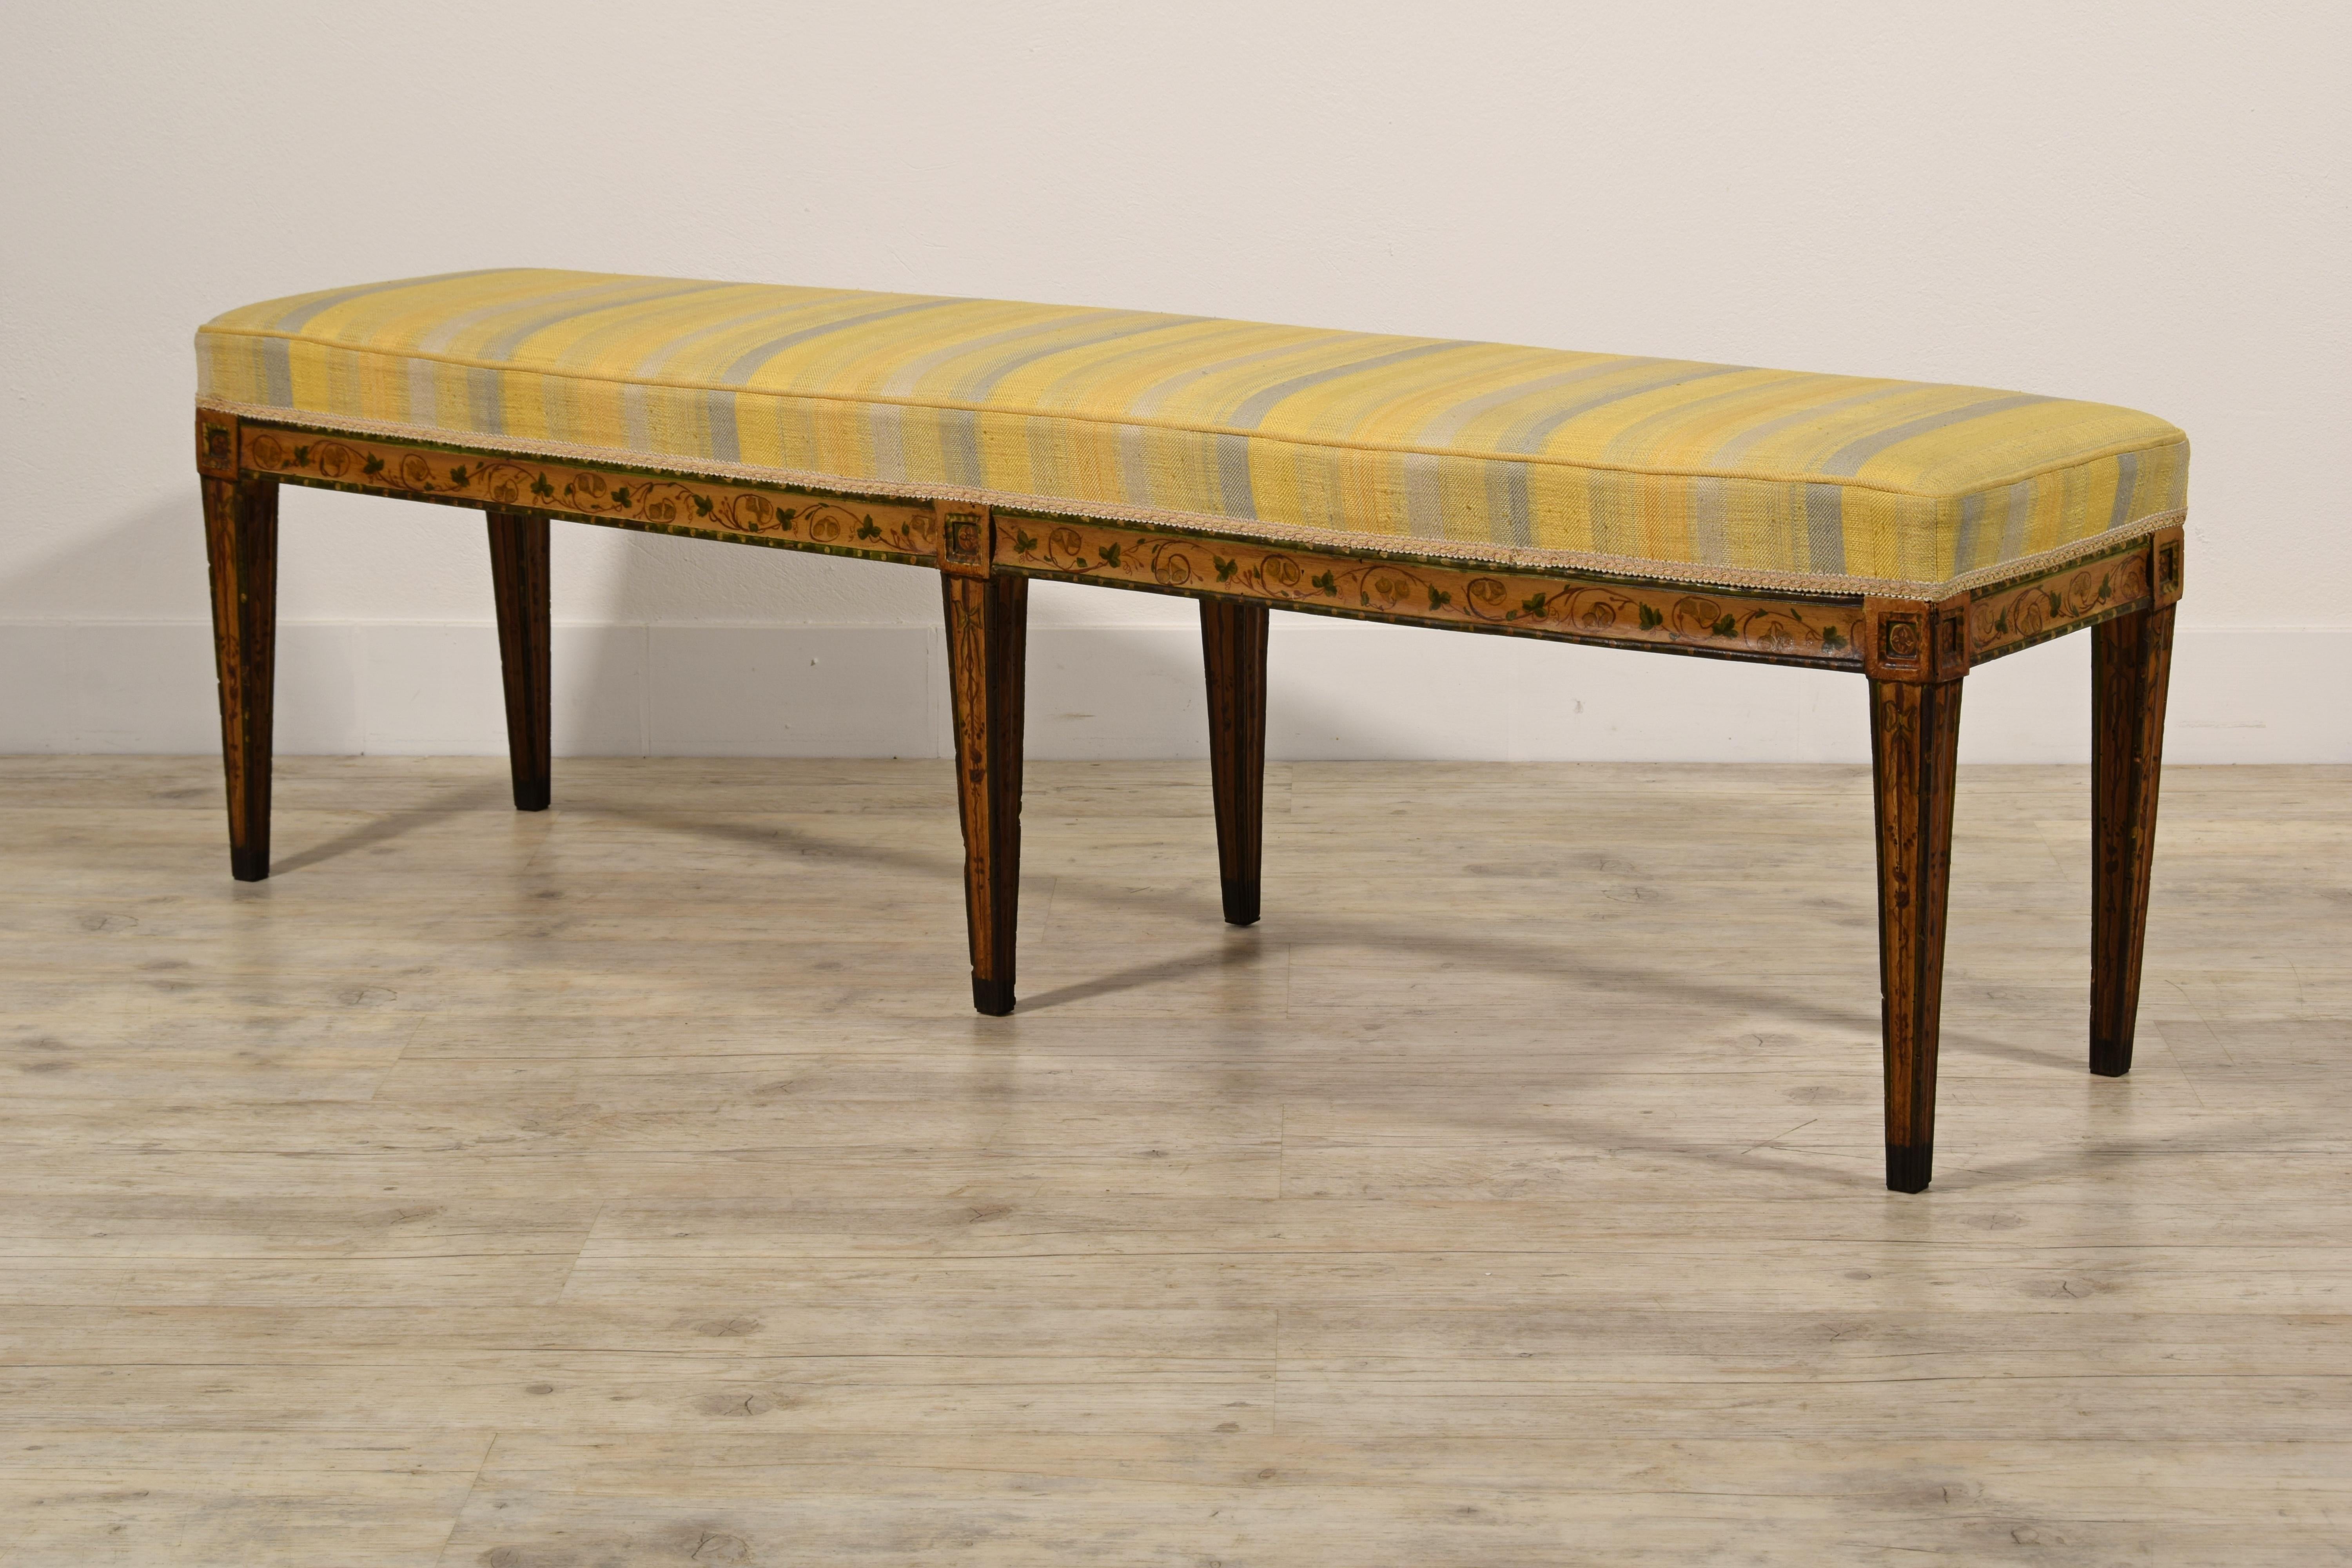 Neoclassical 19th Century, Italian Six-legged Centre Bench Lacquered Wood with Ramage Motive